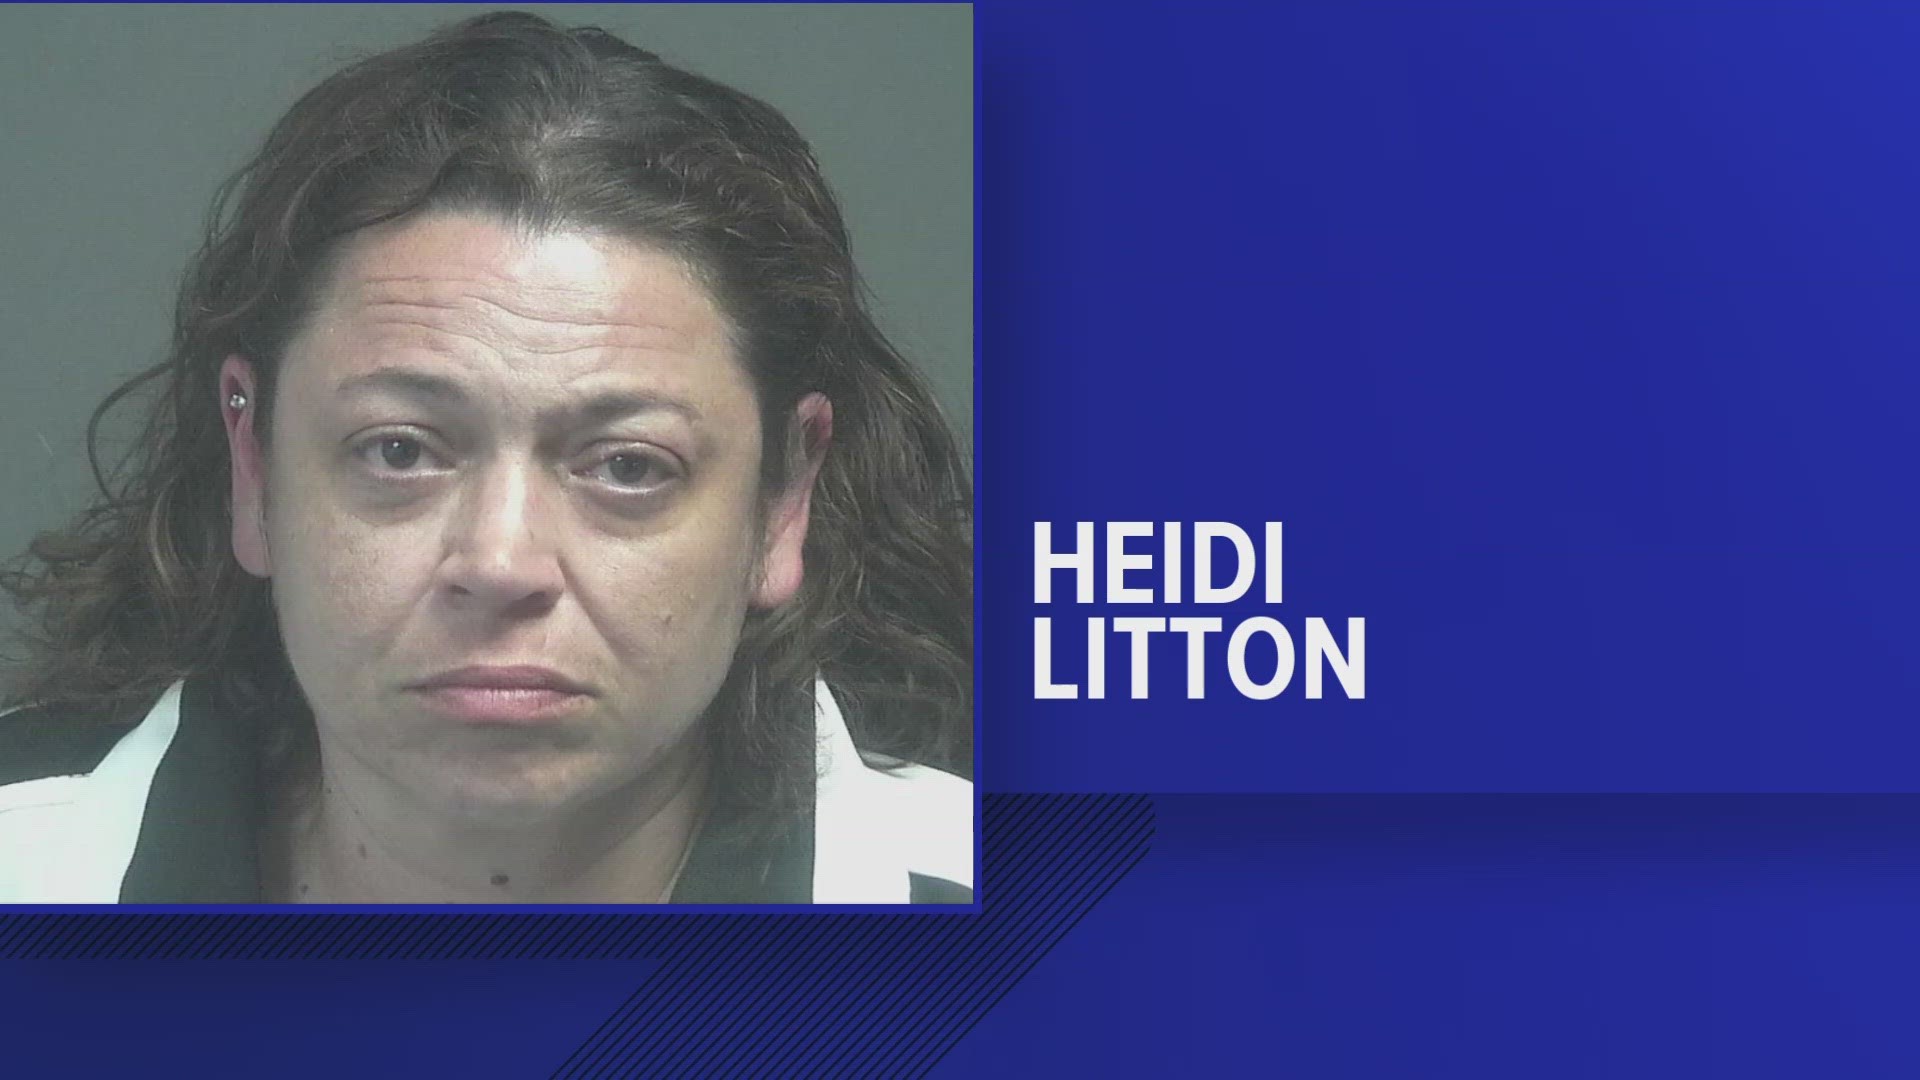 The Alcoa Police Department said Heidi Litton is being held on a $1 million bond.